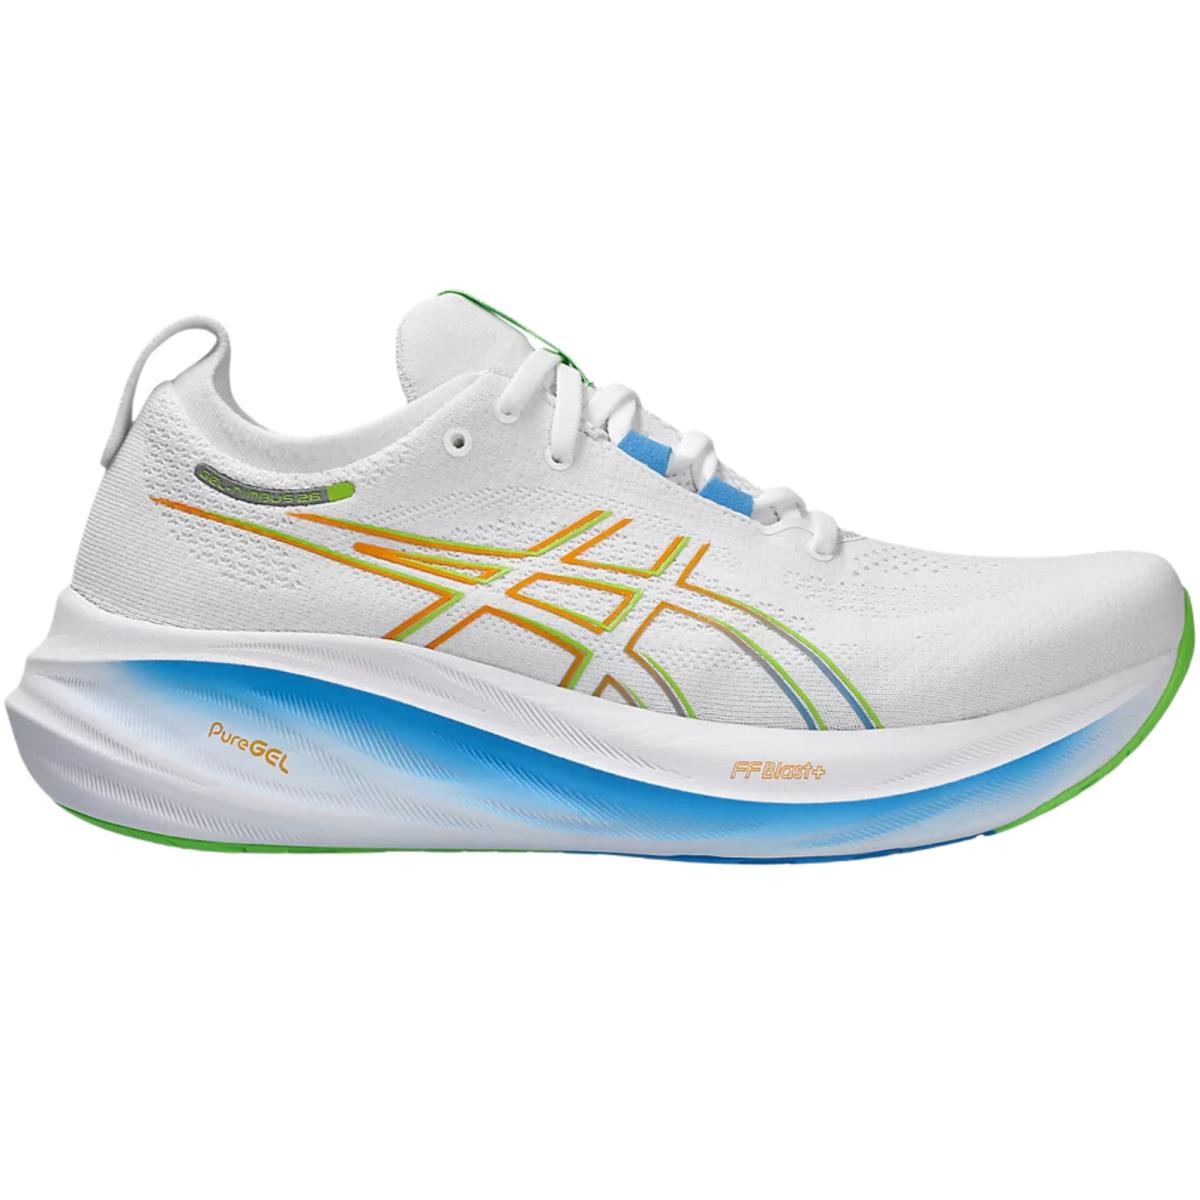 Men`s Asics Gel-nimbus 26 Running Shoes All Colors US Sizes 7-14 White/Waterscape